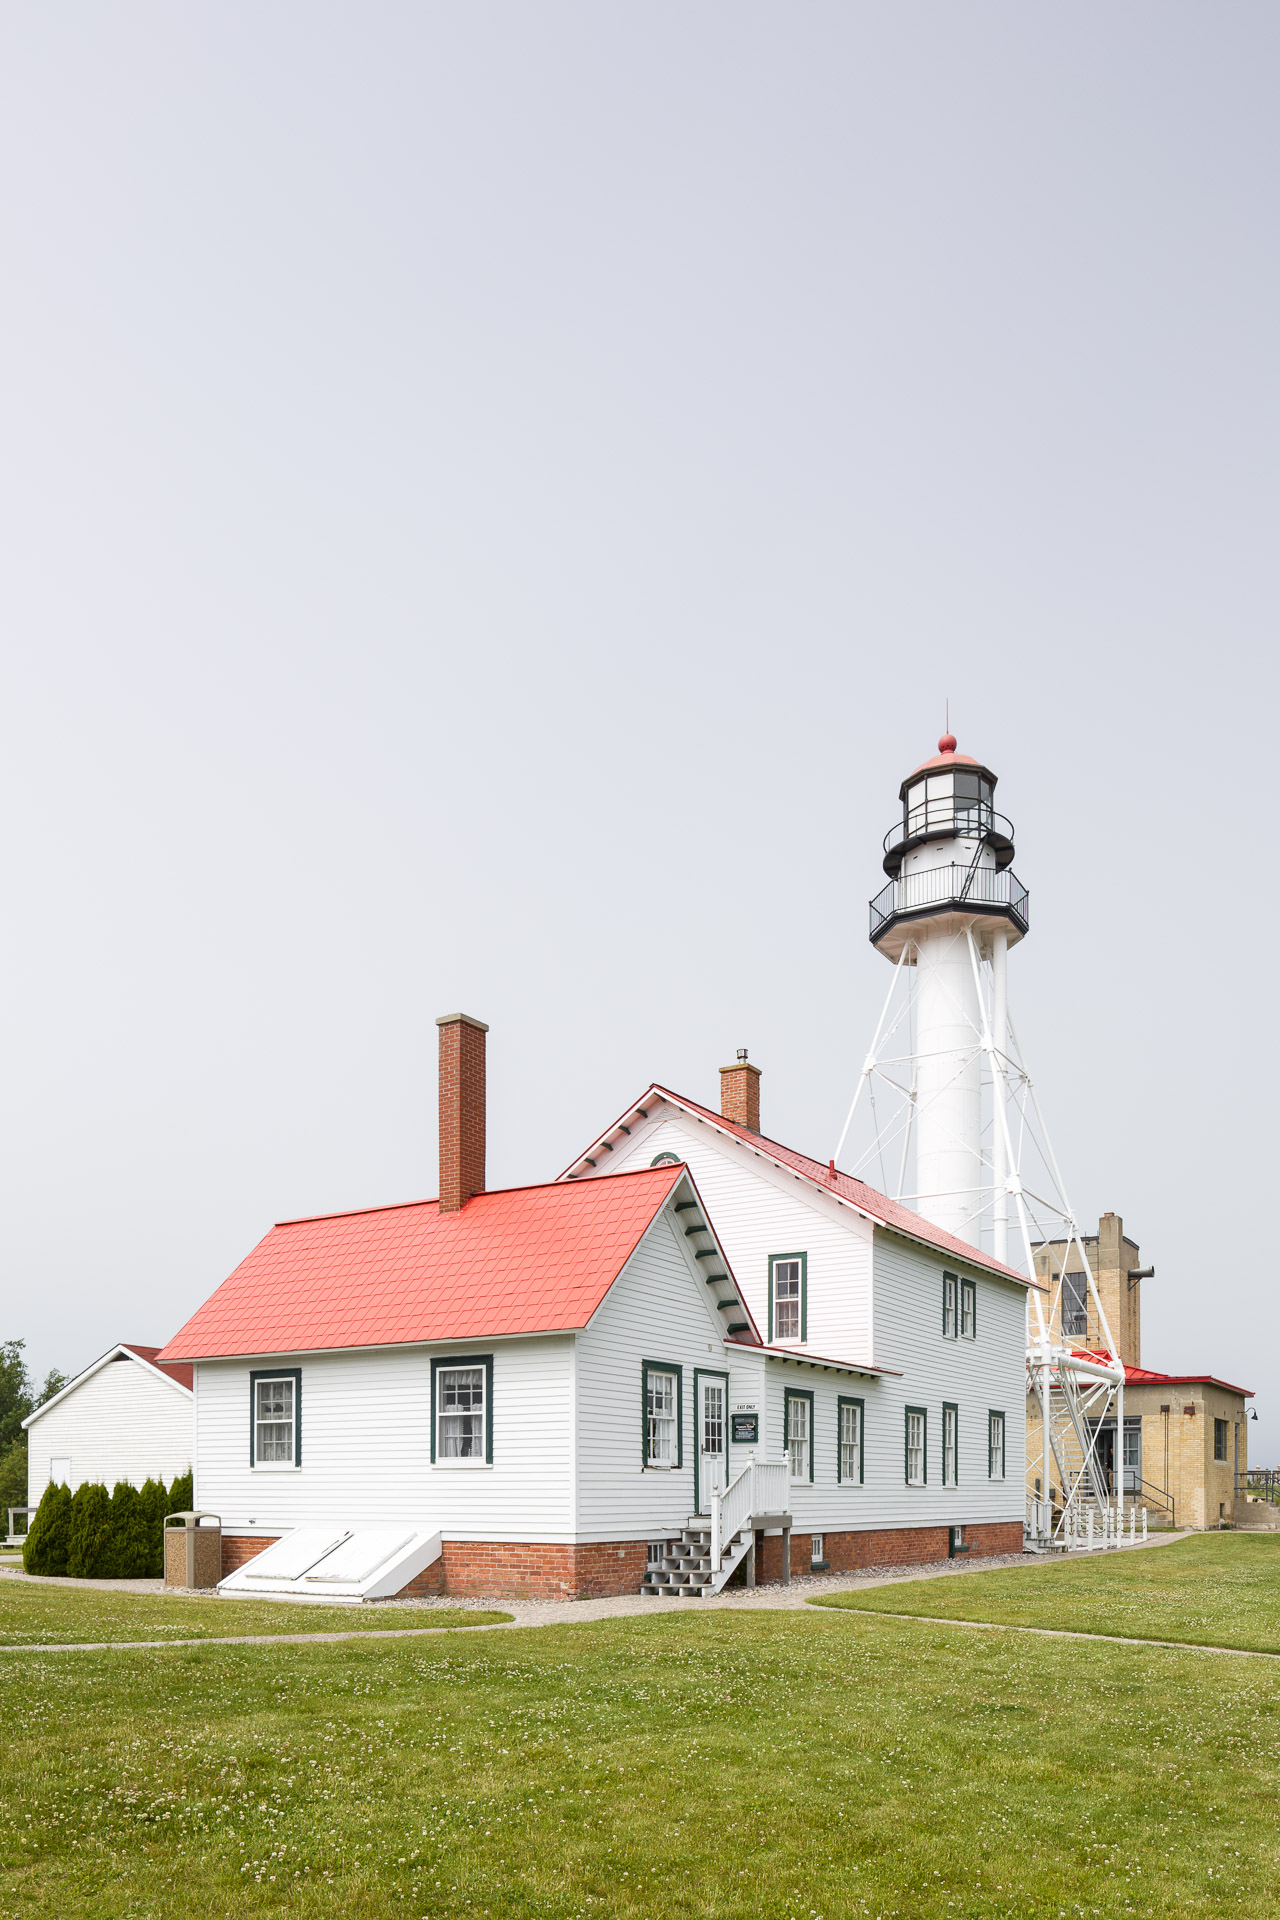 Whitefish Point Light in Paradise, Michigan. Photo by Jason R. Woods.